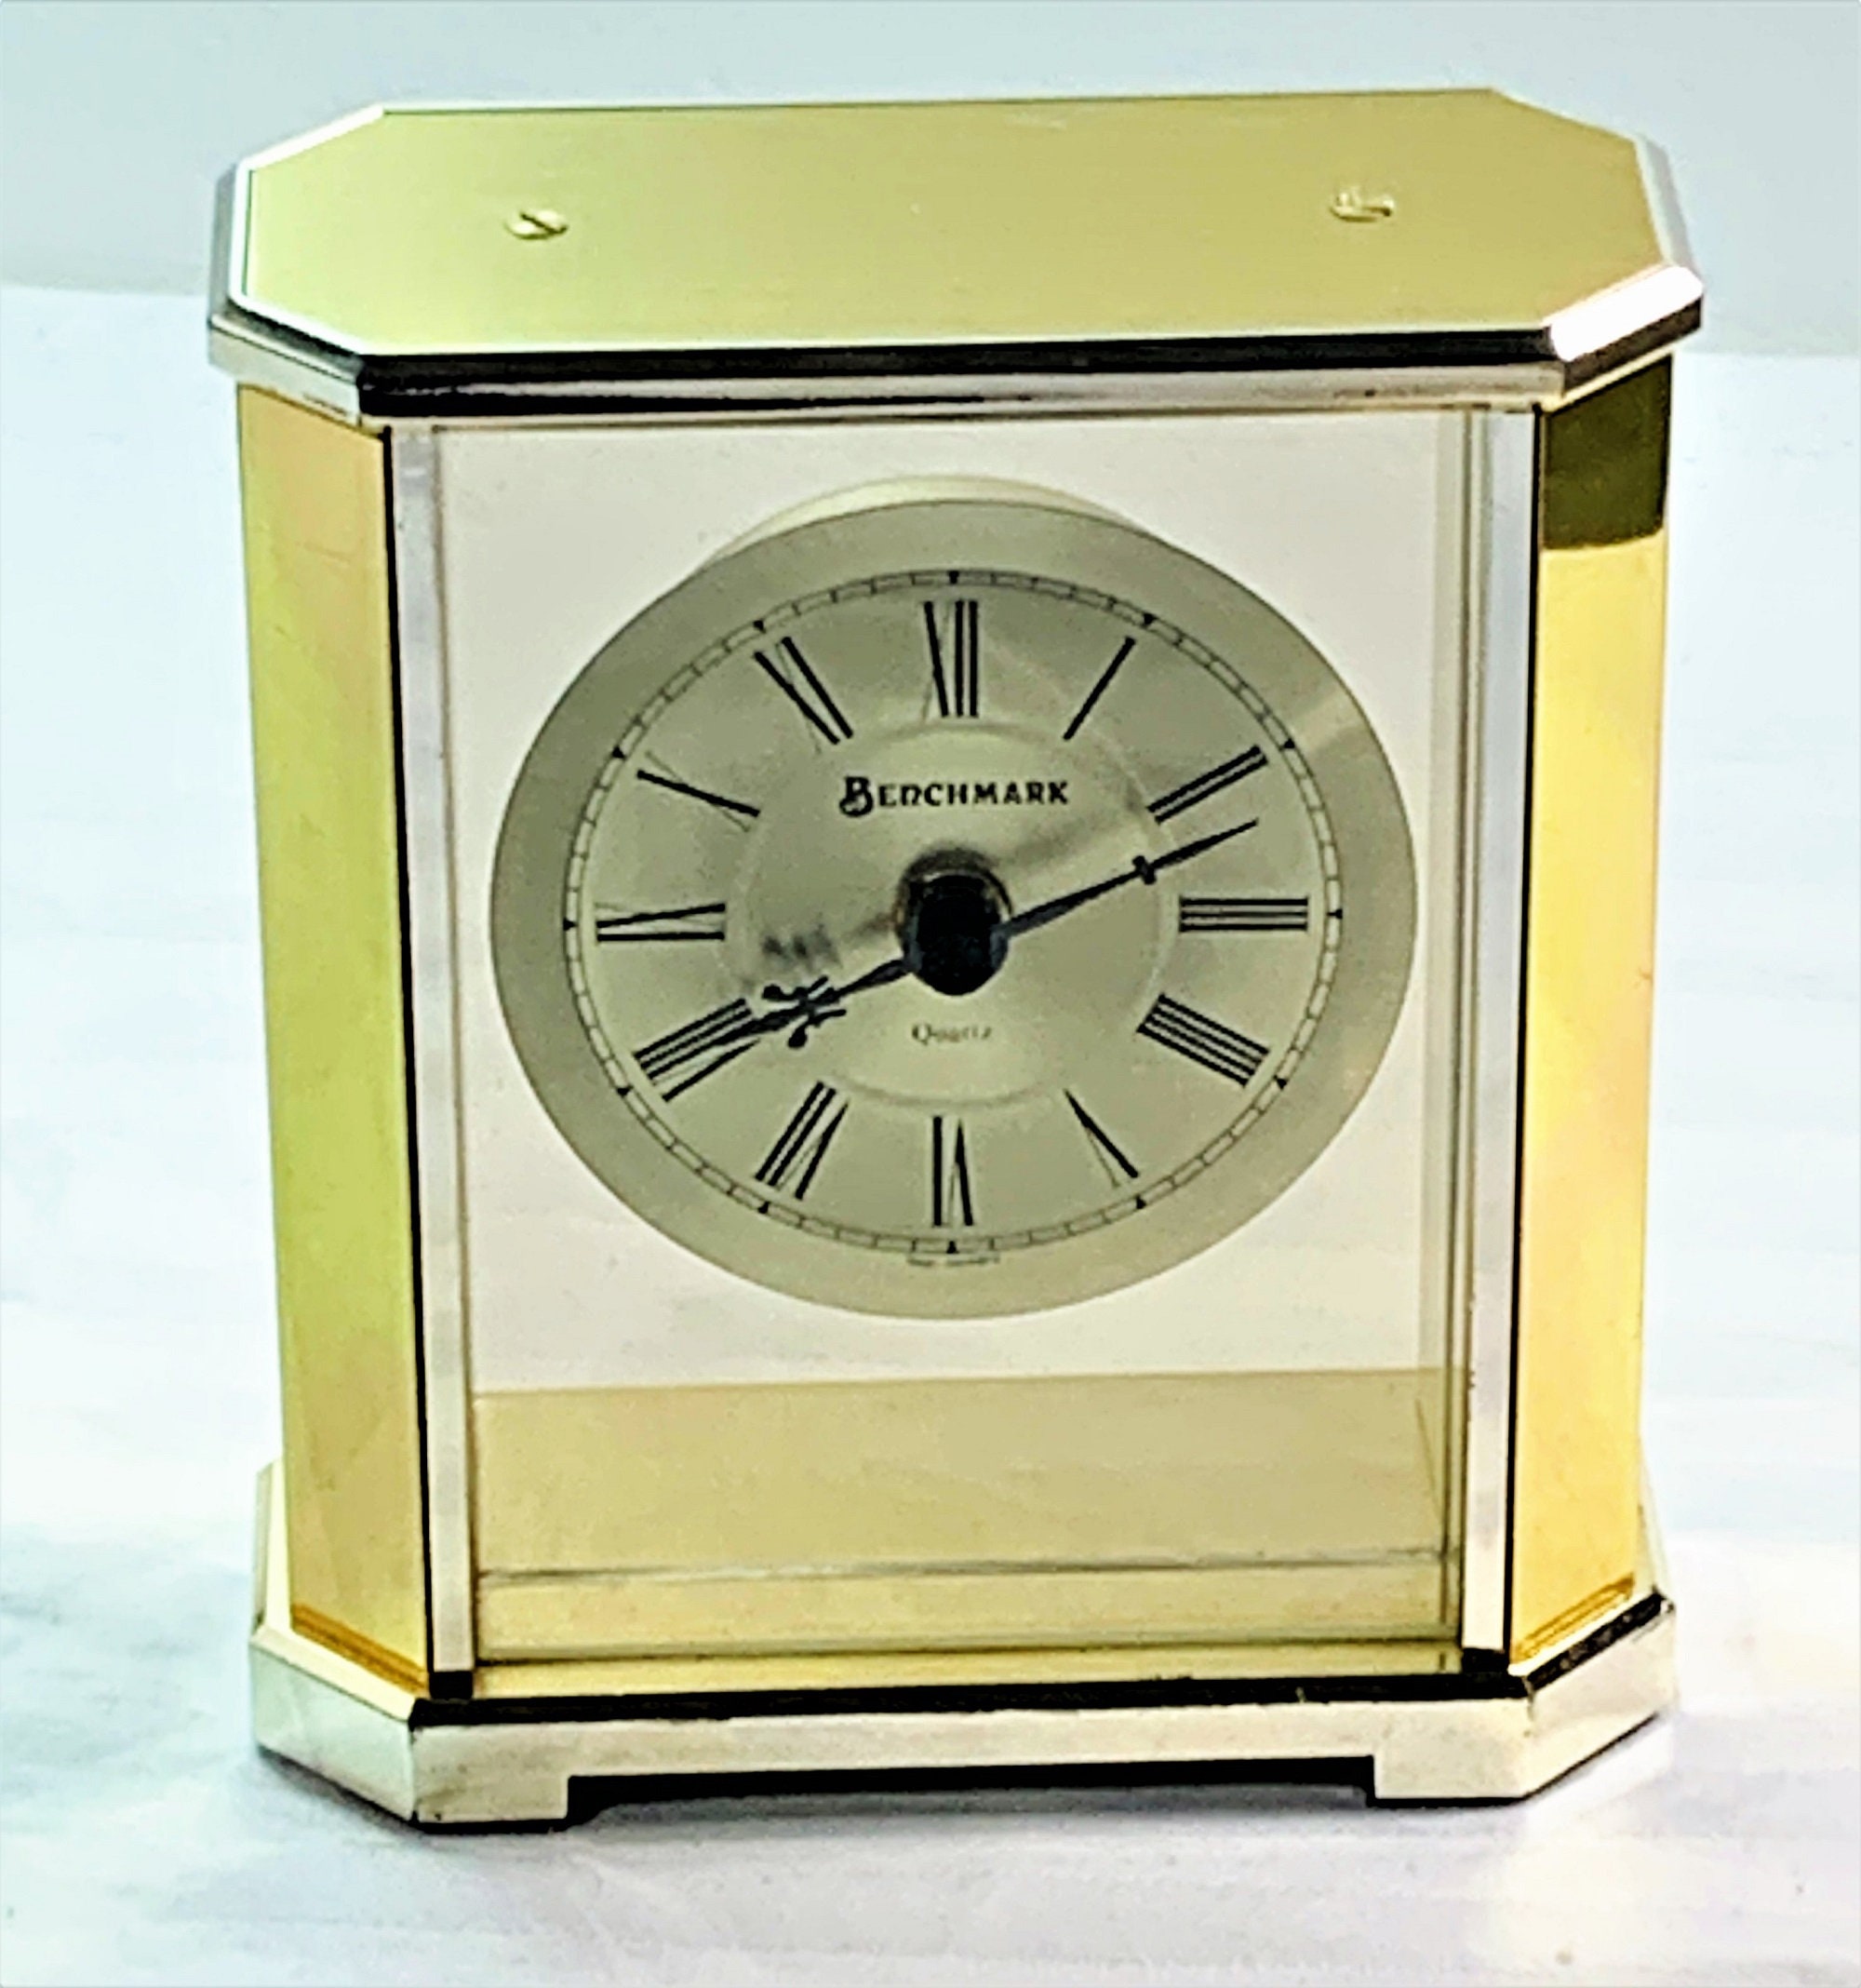 Requires 1 AA Battery Tested Cond Solid Brushed & Polished Brass made in Germany 197080s in Exc Working Benchmark Quartz Mantel Clock